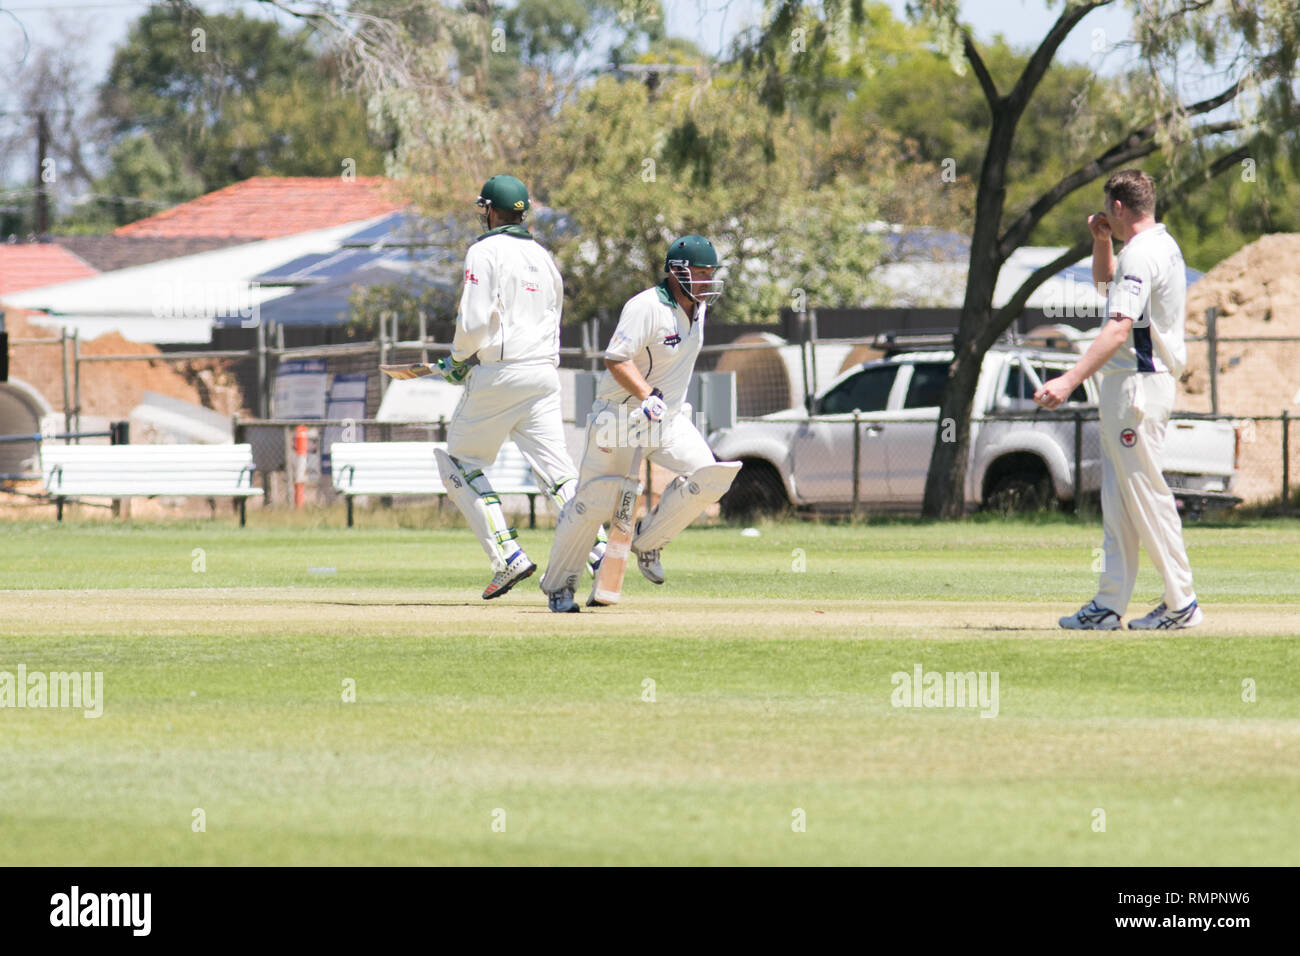 Adelaide, Australia. 16th Feb, 2019. An Association  Cricket match between Woodville Rechabites Cricket club and Pooraka Mighty Bulls being played at the Matheson Reserve Adelaide on a hot saturday afternoon with temperatures of 29 degrees celsius Credit: amer ghazzal/Alamy Live News Stock Photo